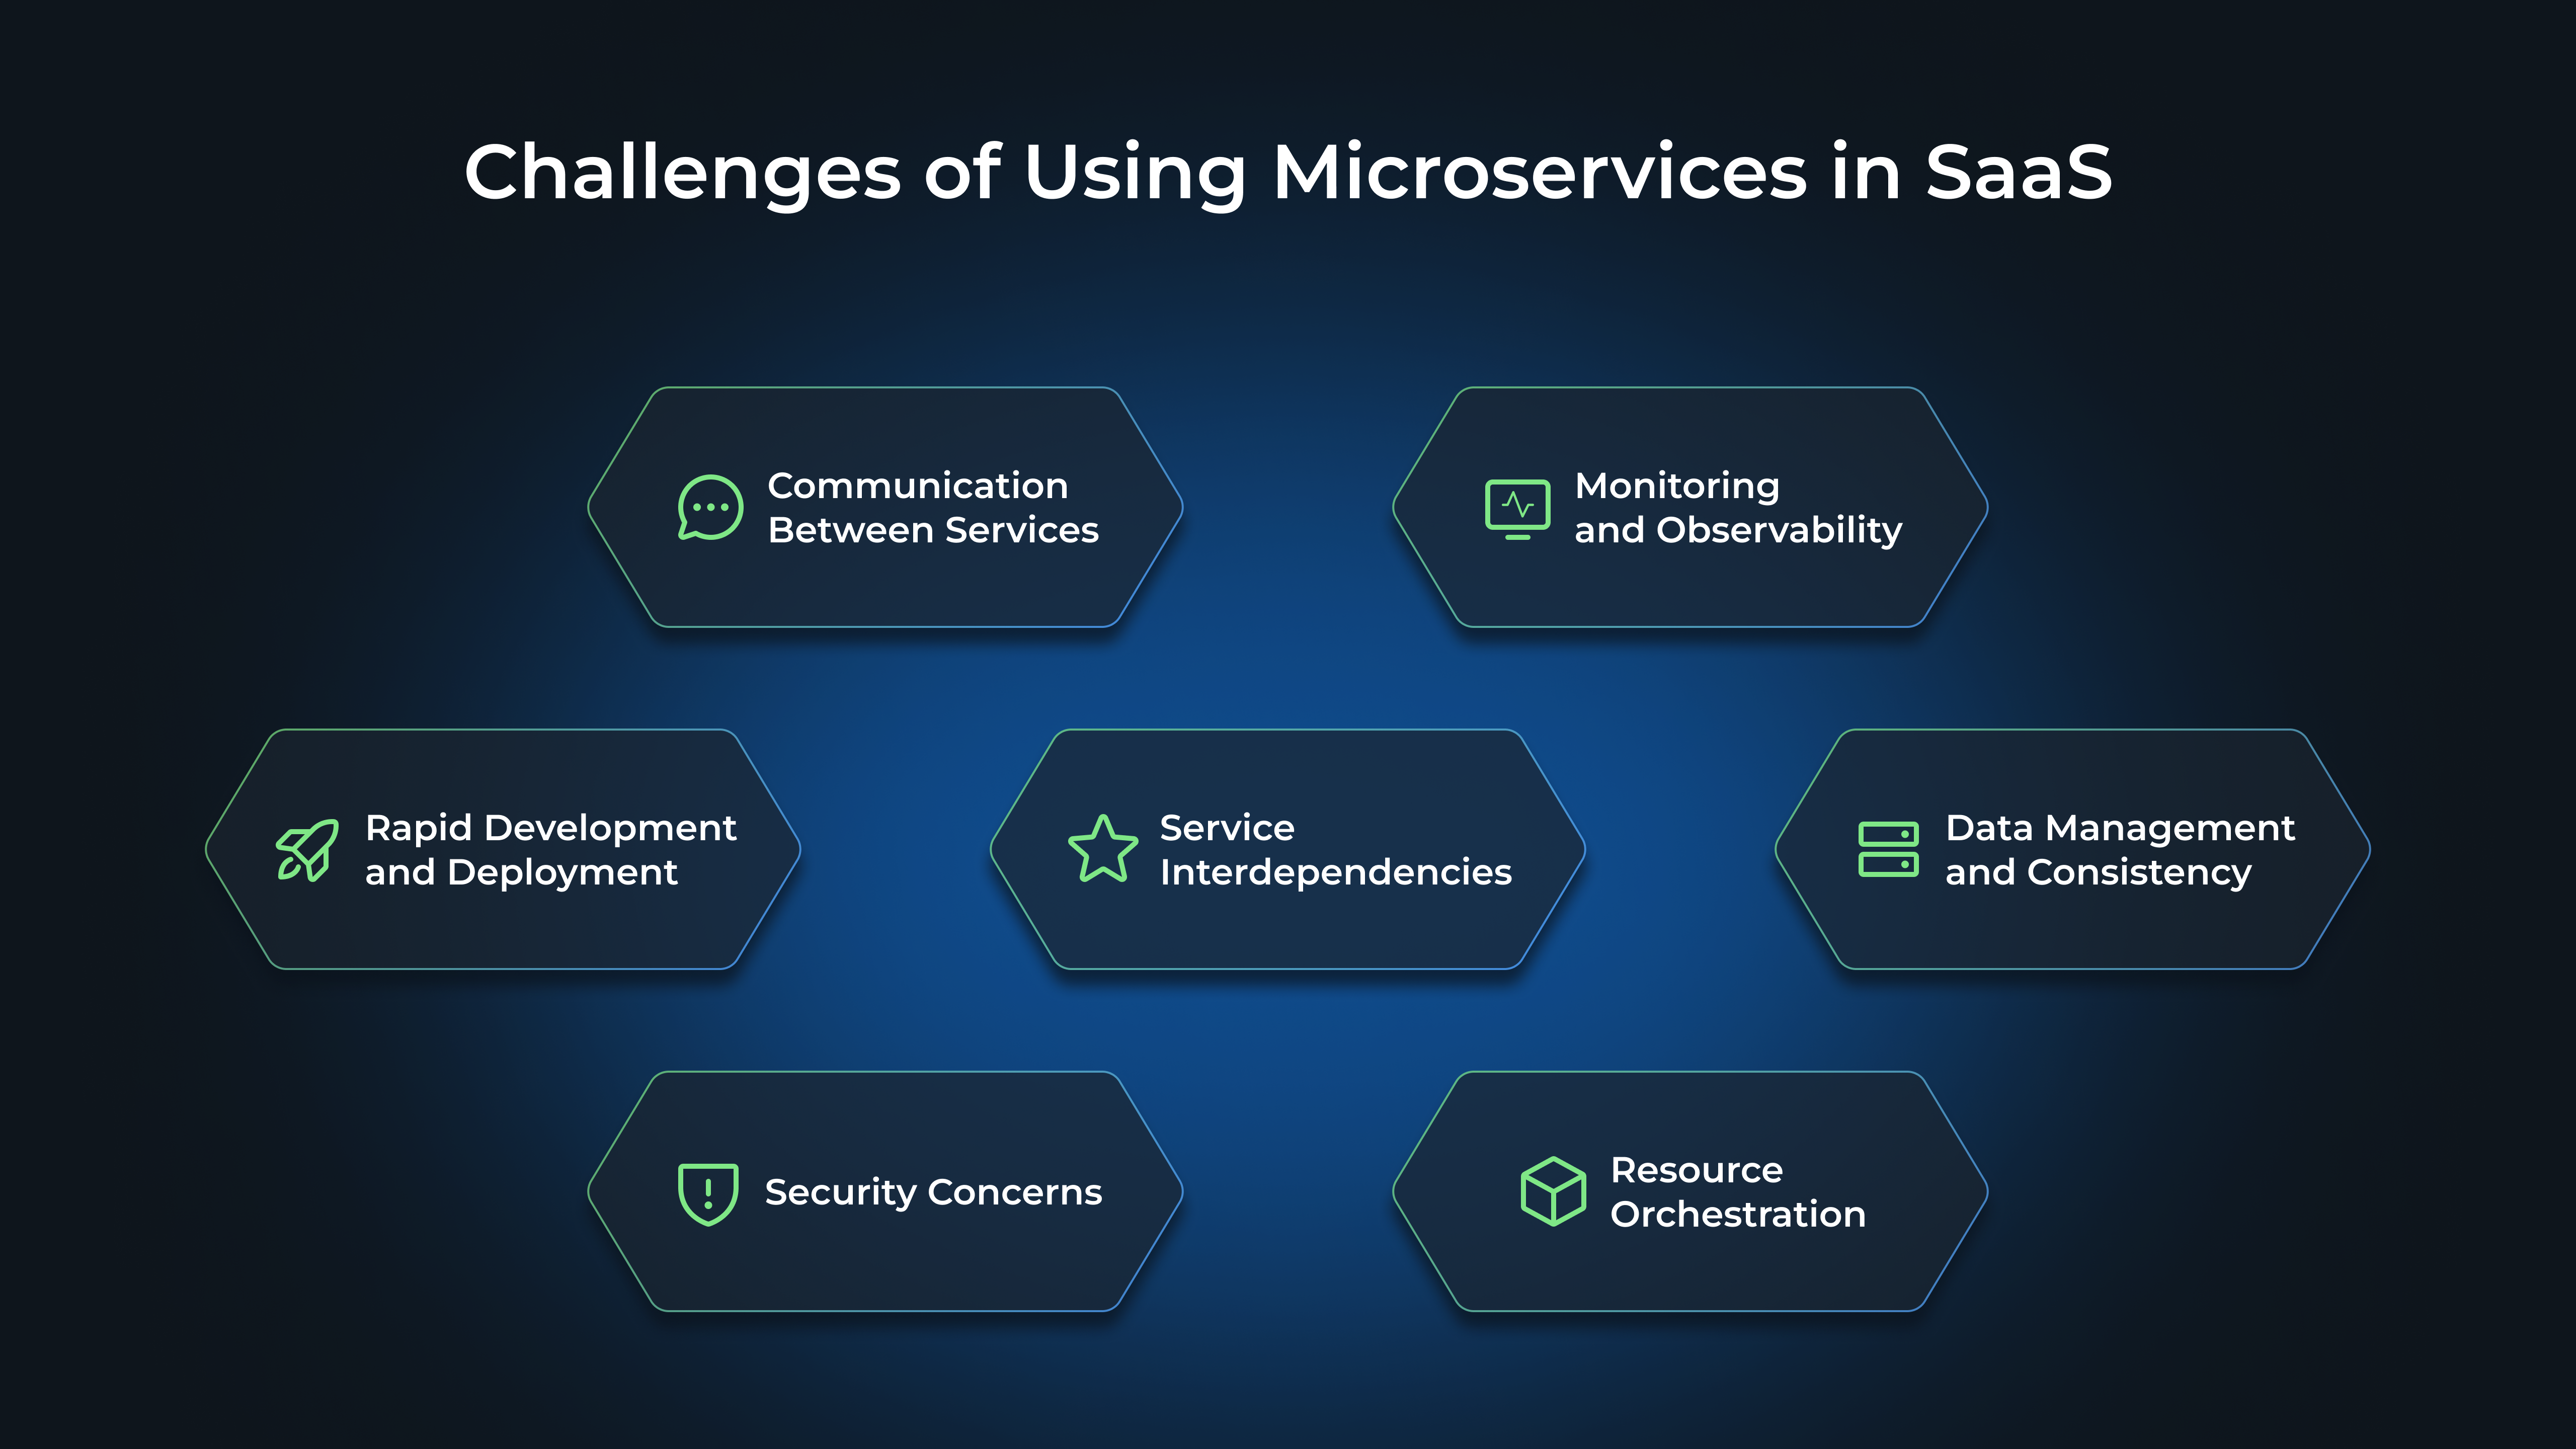 Challenges of Using Microservices in SaaS: Communication Between Services, Monitoring and Observability, Rapid Development and Deployment, Service Interdependencies, Data Management and Consistency, Security Concerns, Resource Orchestration
